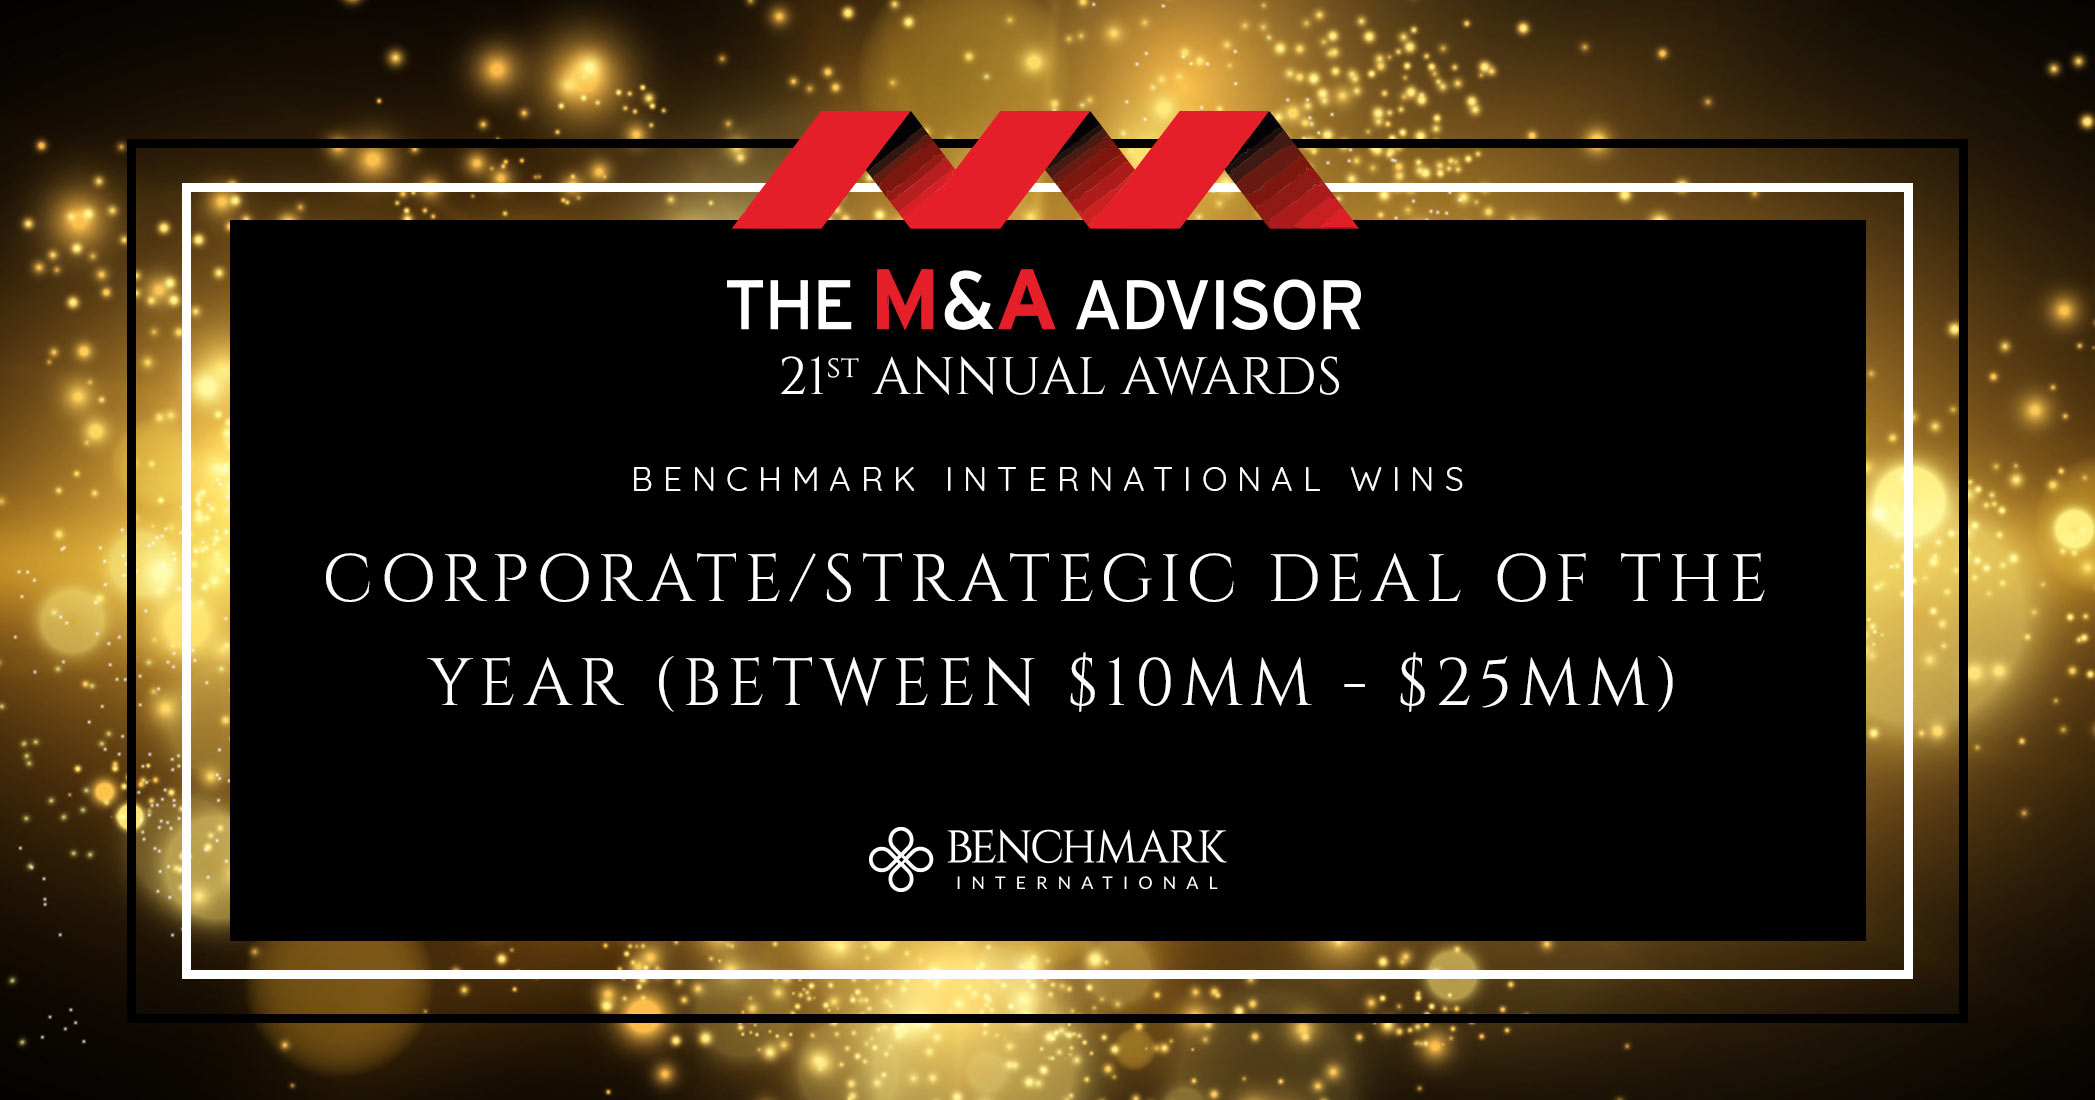 Benchmark International Awarded Corporate / Strategic Deal Of The Year ($10MM - $25MM)